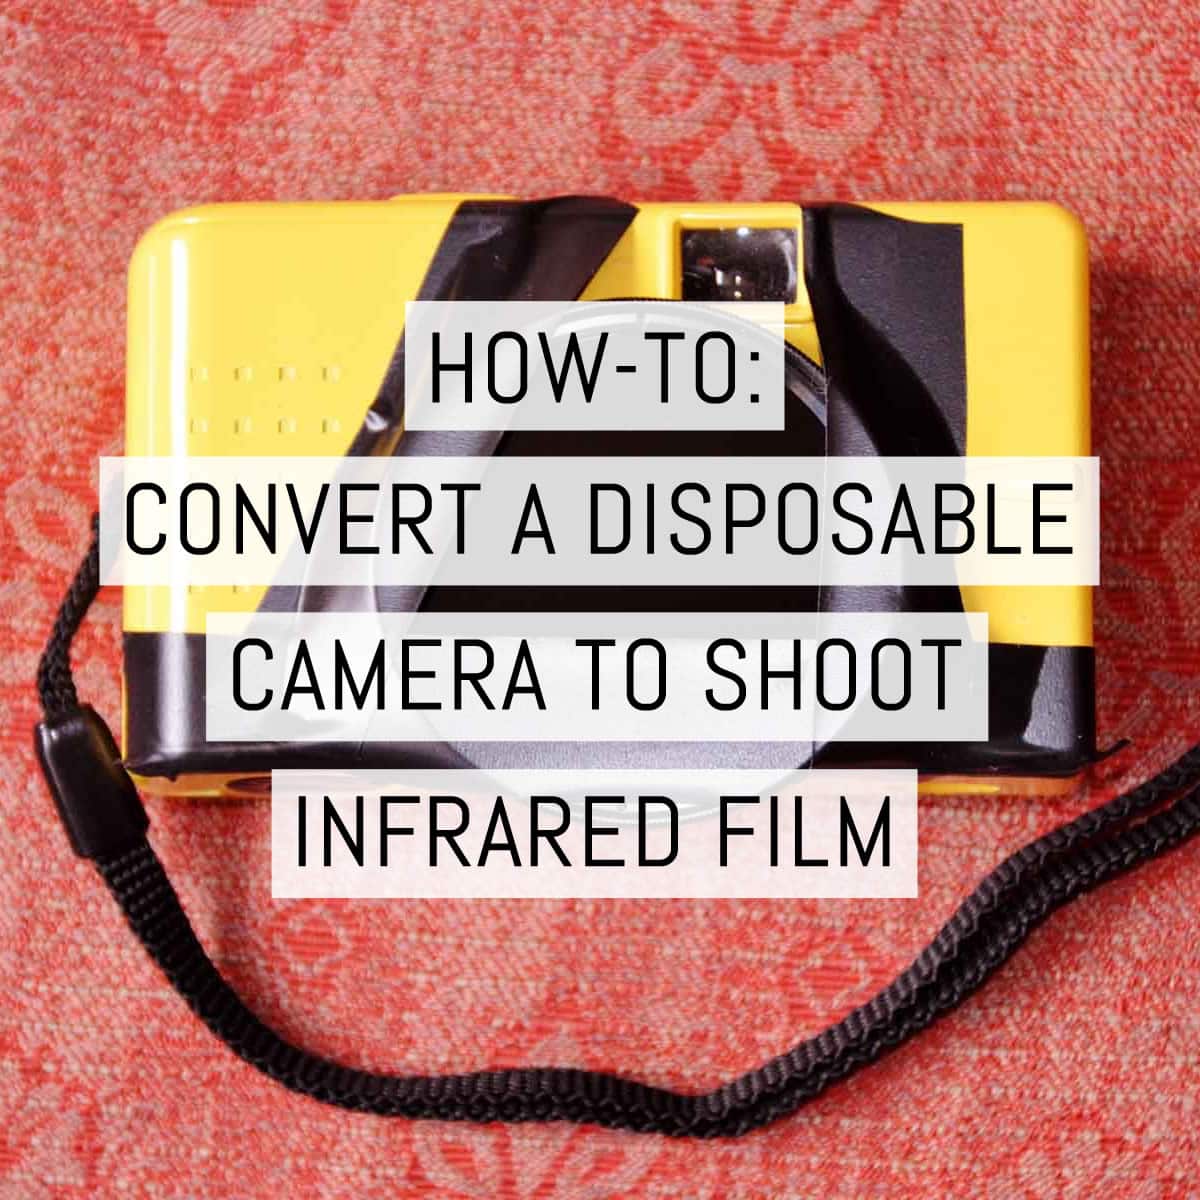 Cover - How to convert a disposable camera to shoot infrared film